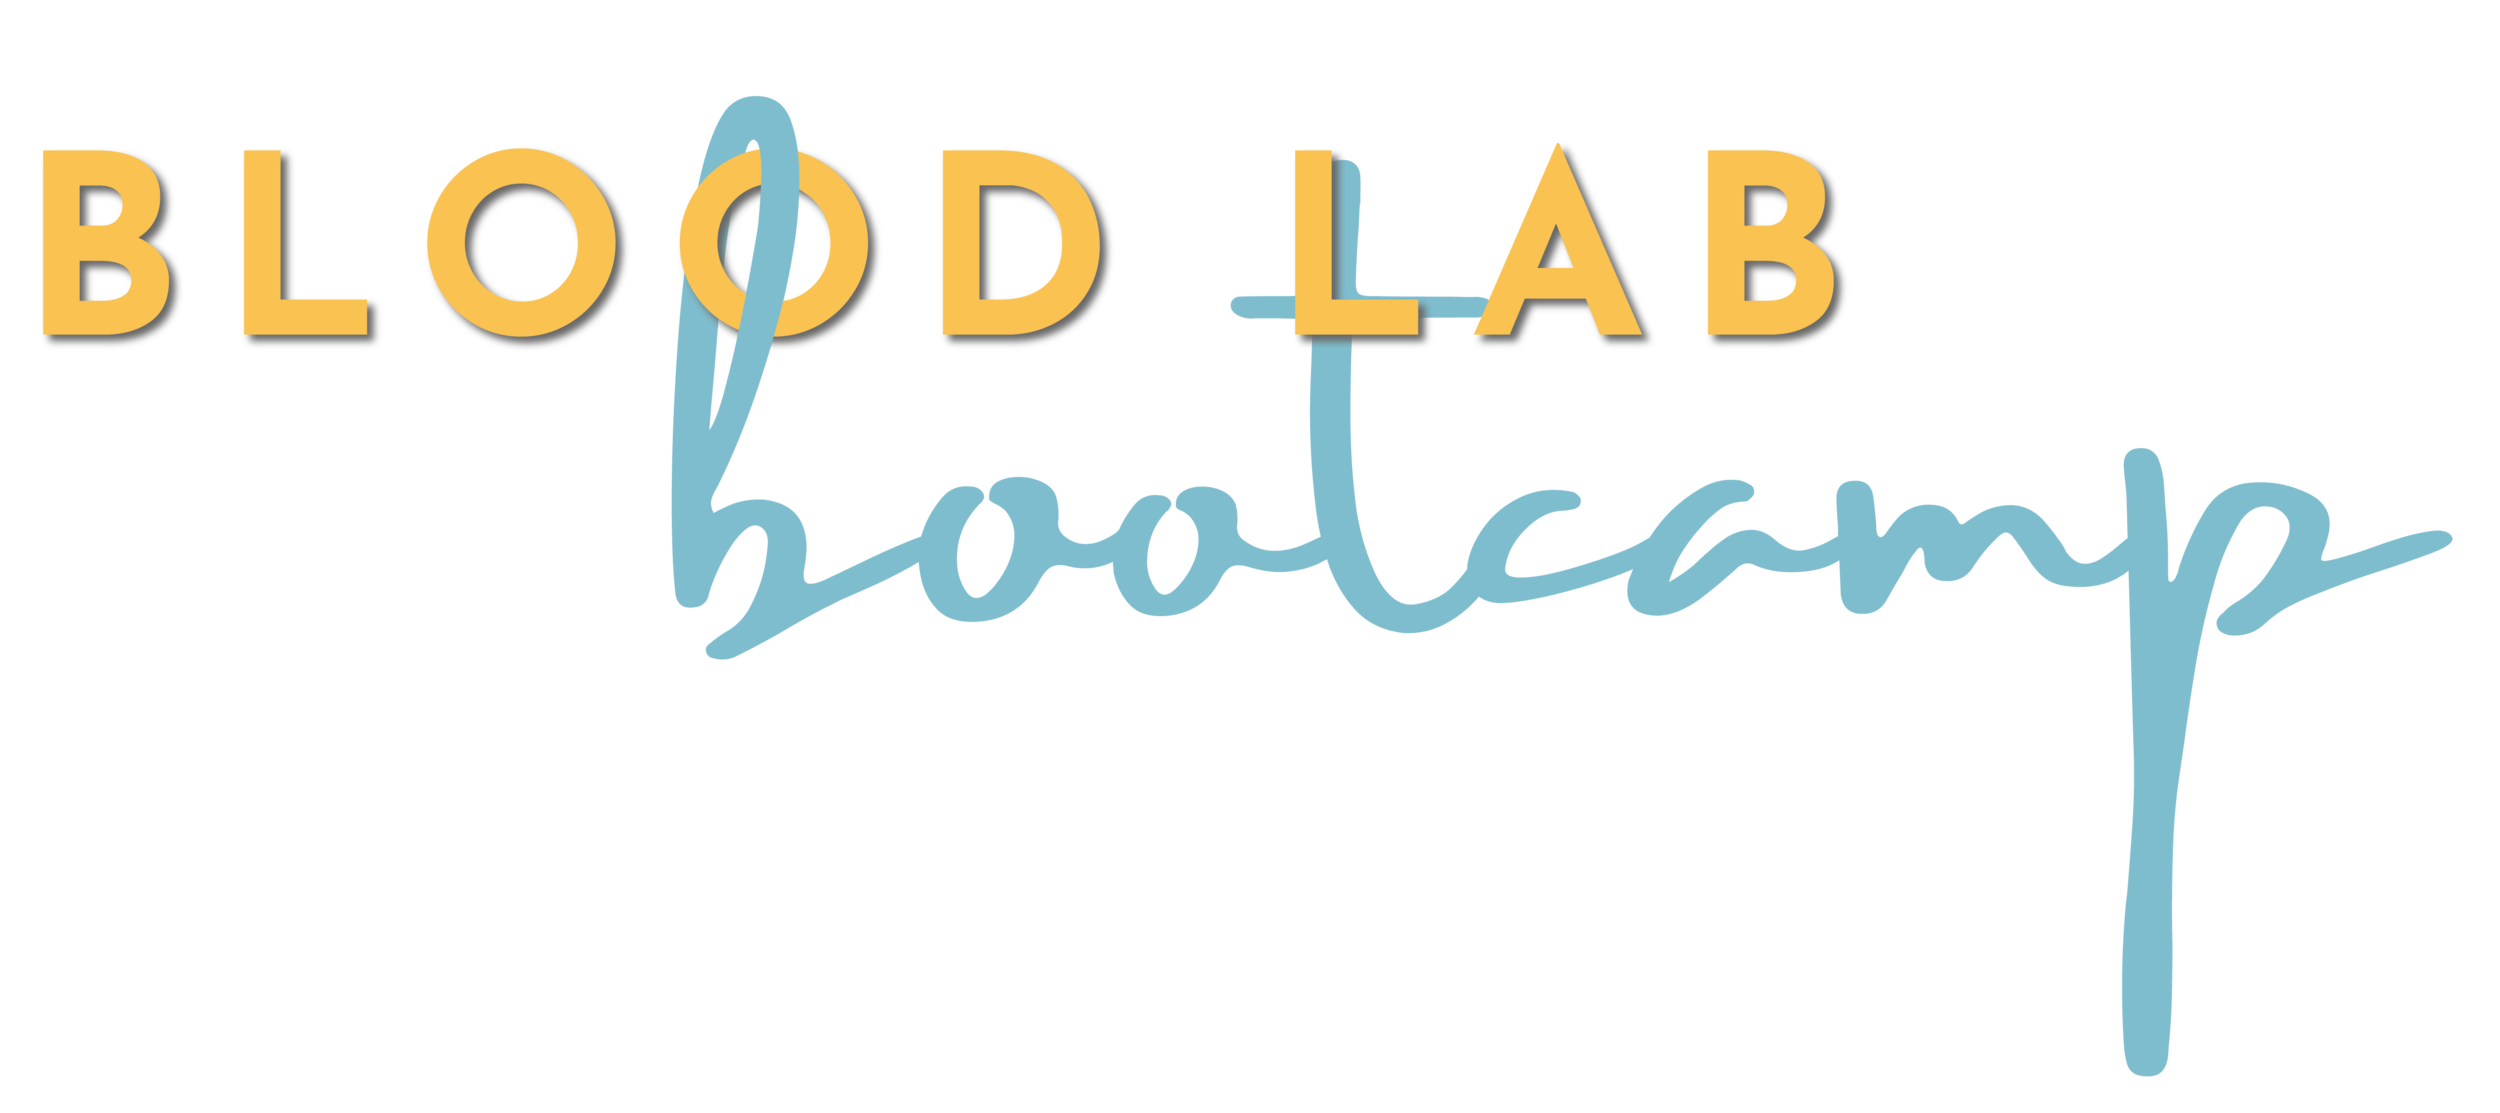 Blood Lab Bootcamp-01.png